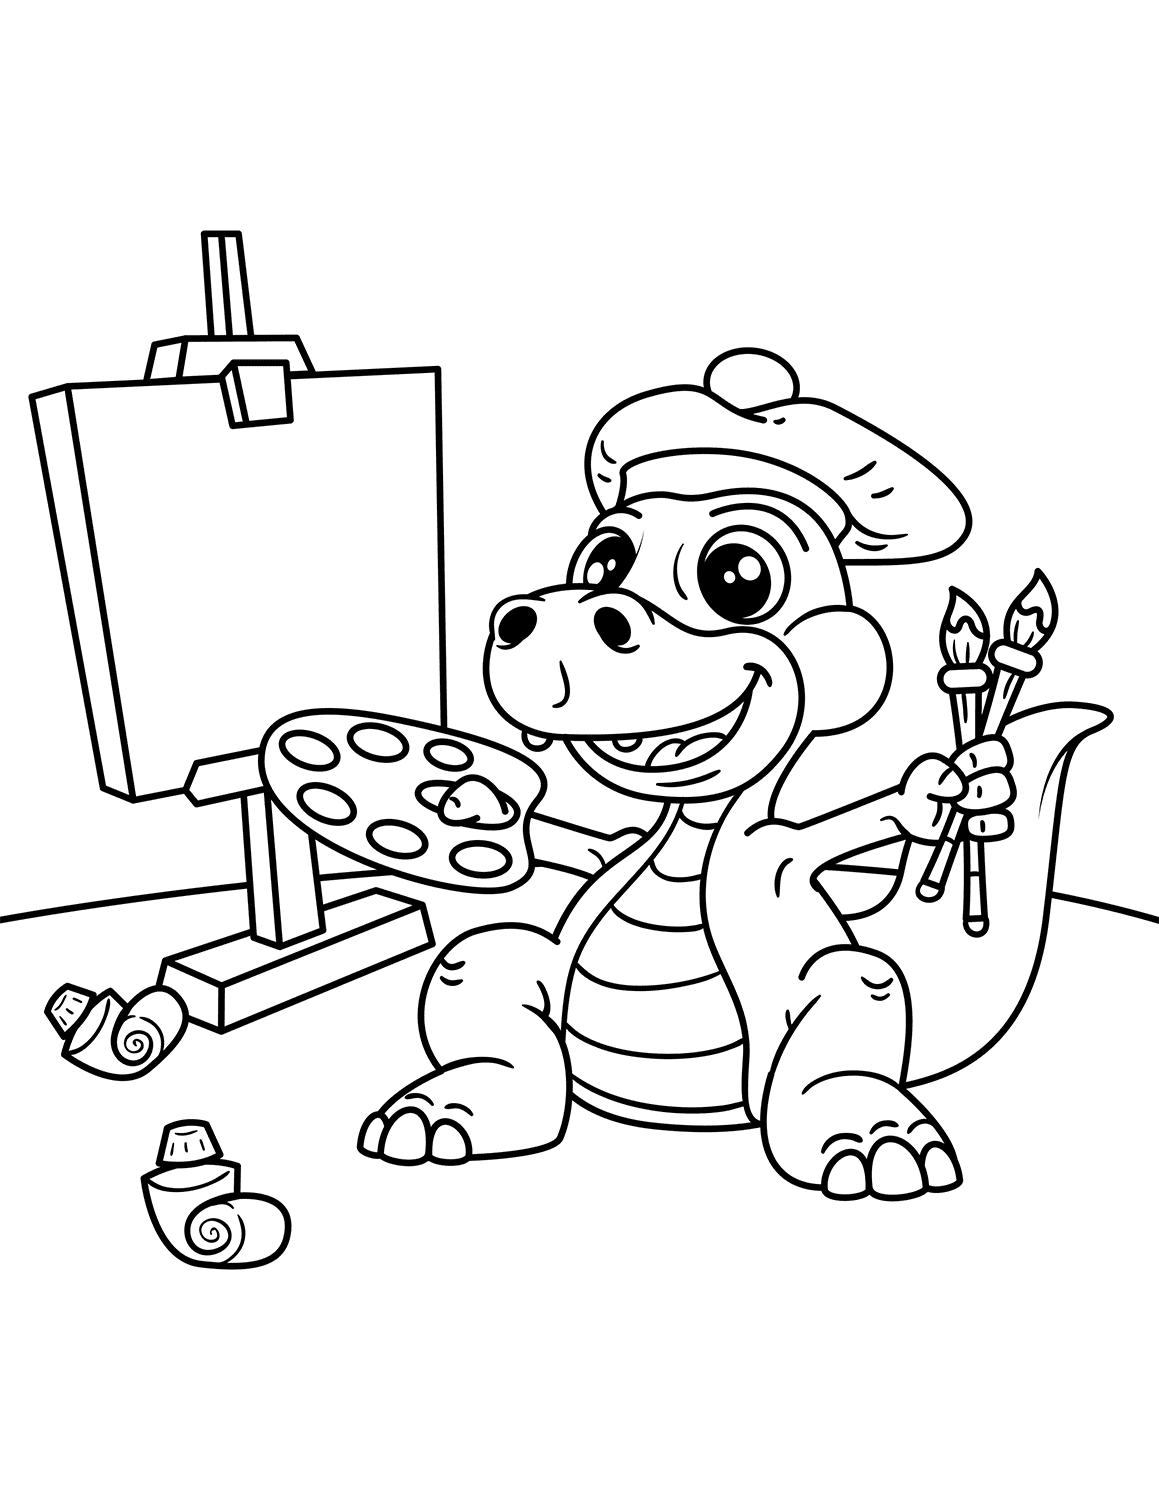 Cute Dinosaur artist with easel brush and pallete of colors Coloring Page